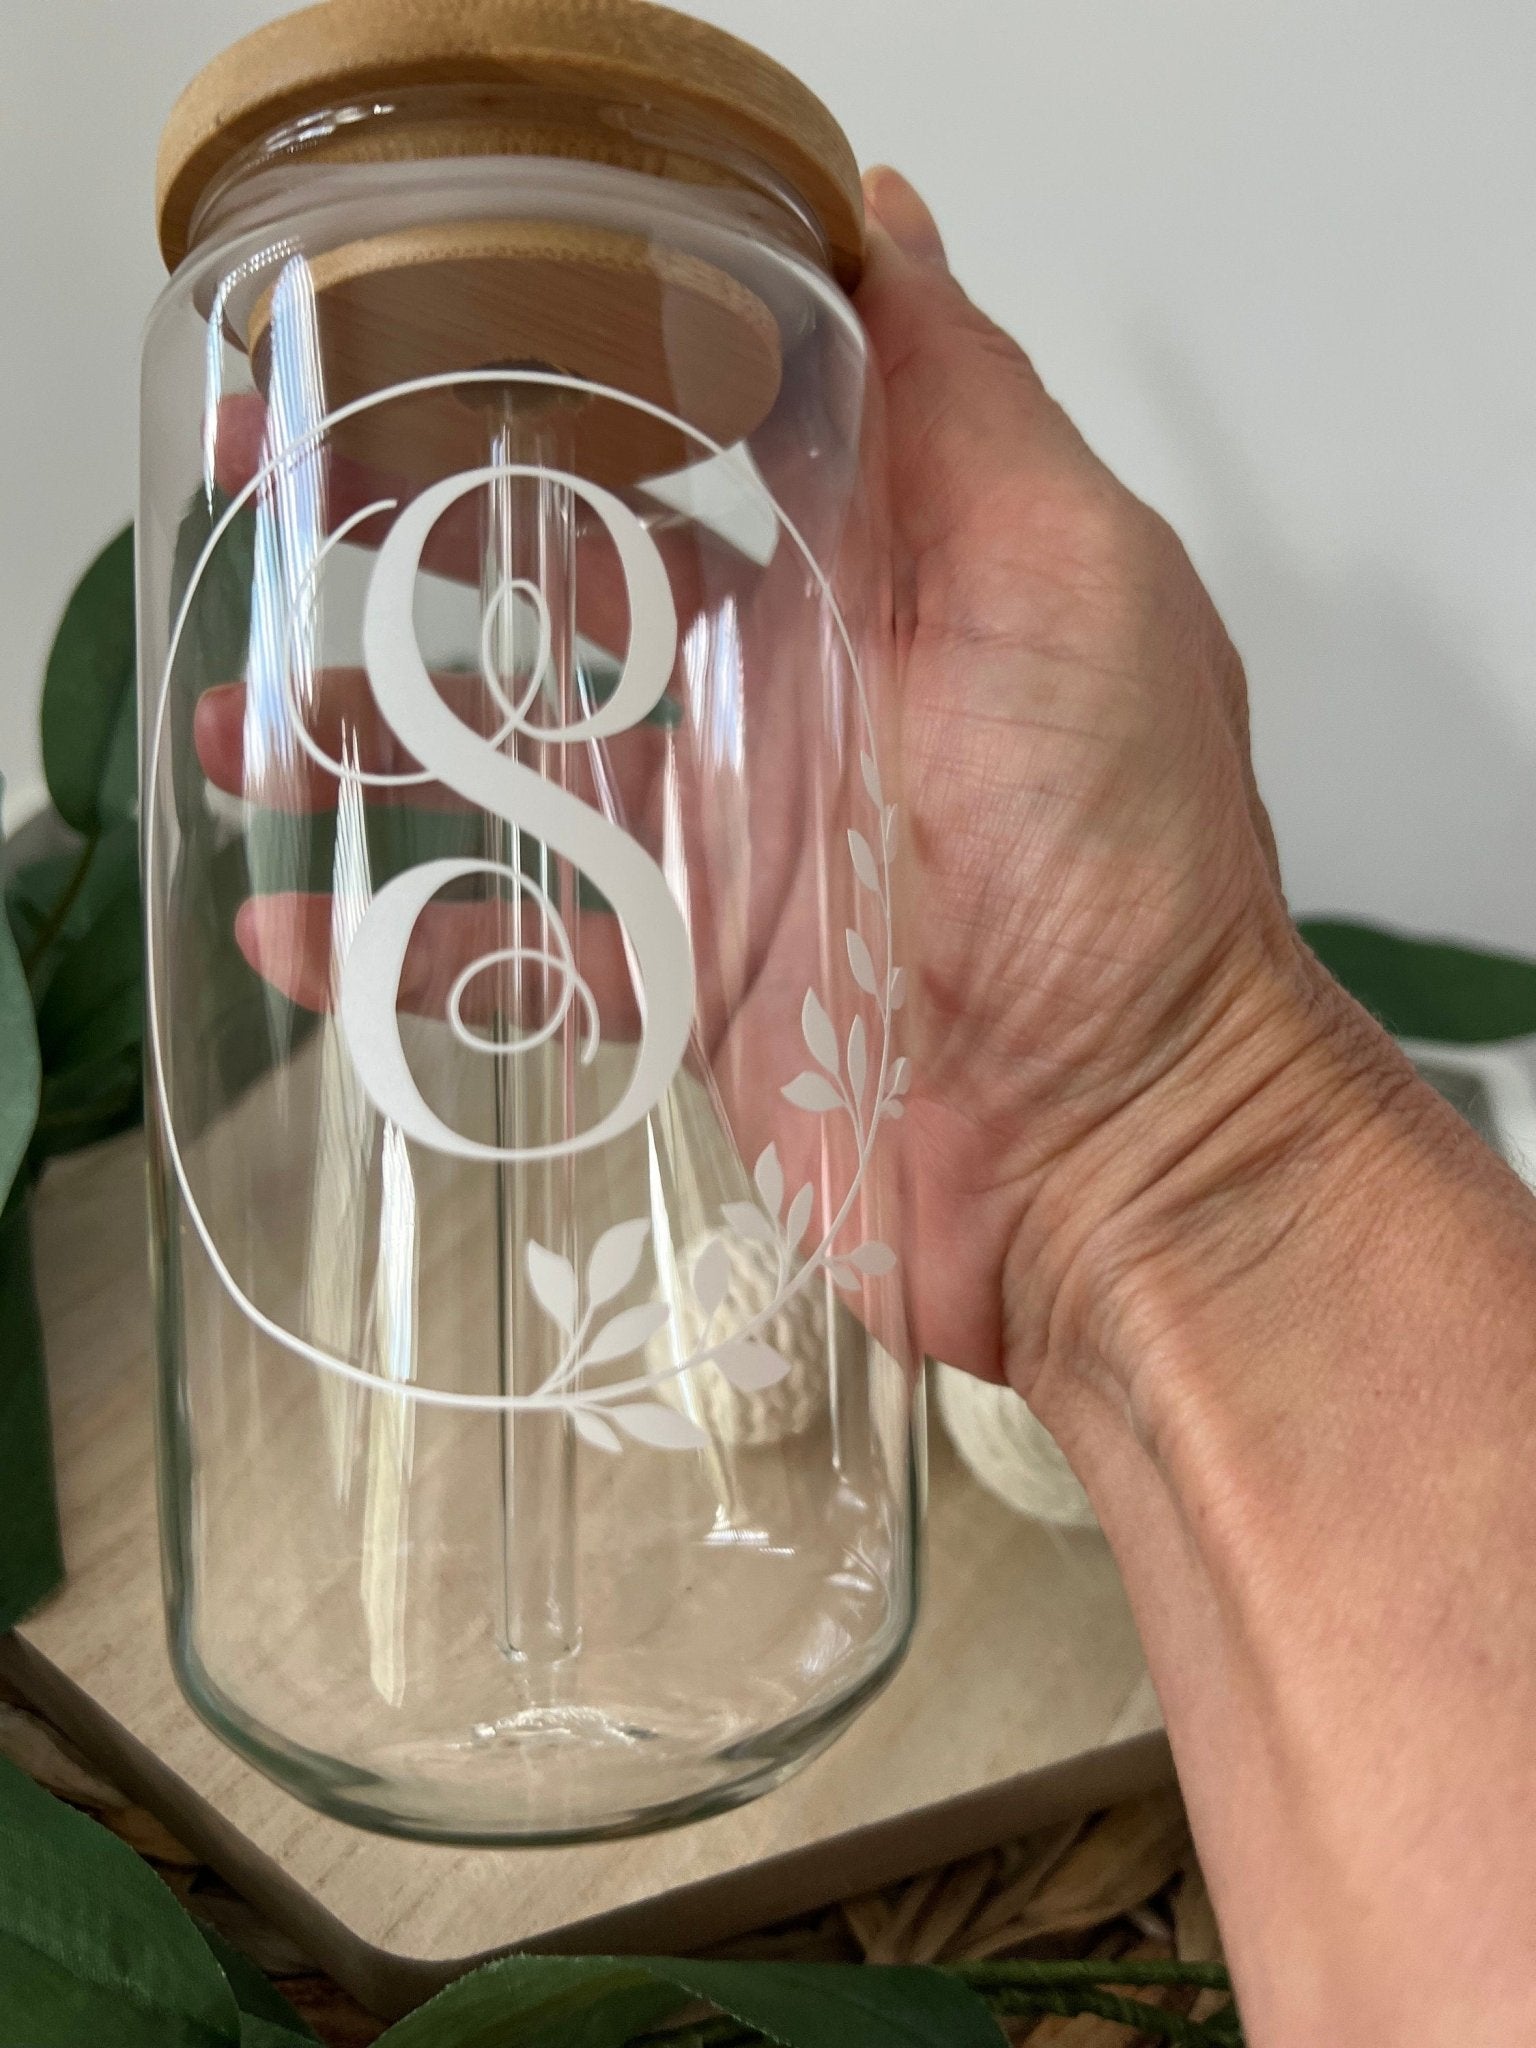 16 Oz Personalized Glass Cup With Bamboo Lid and Straw Custom Beer